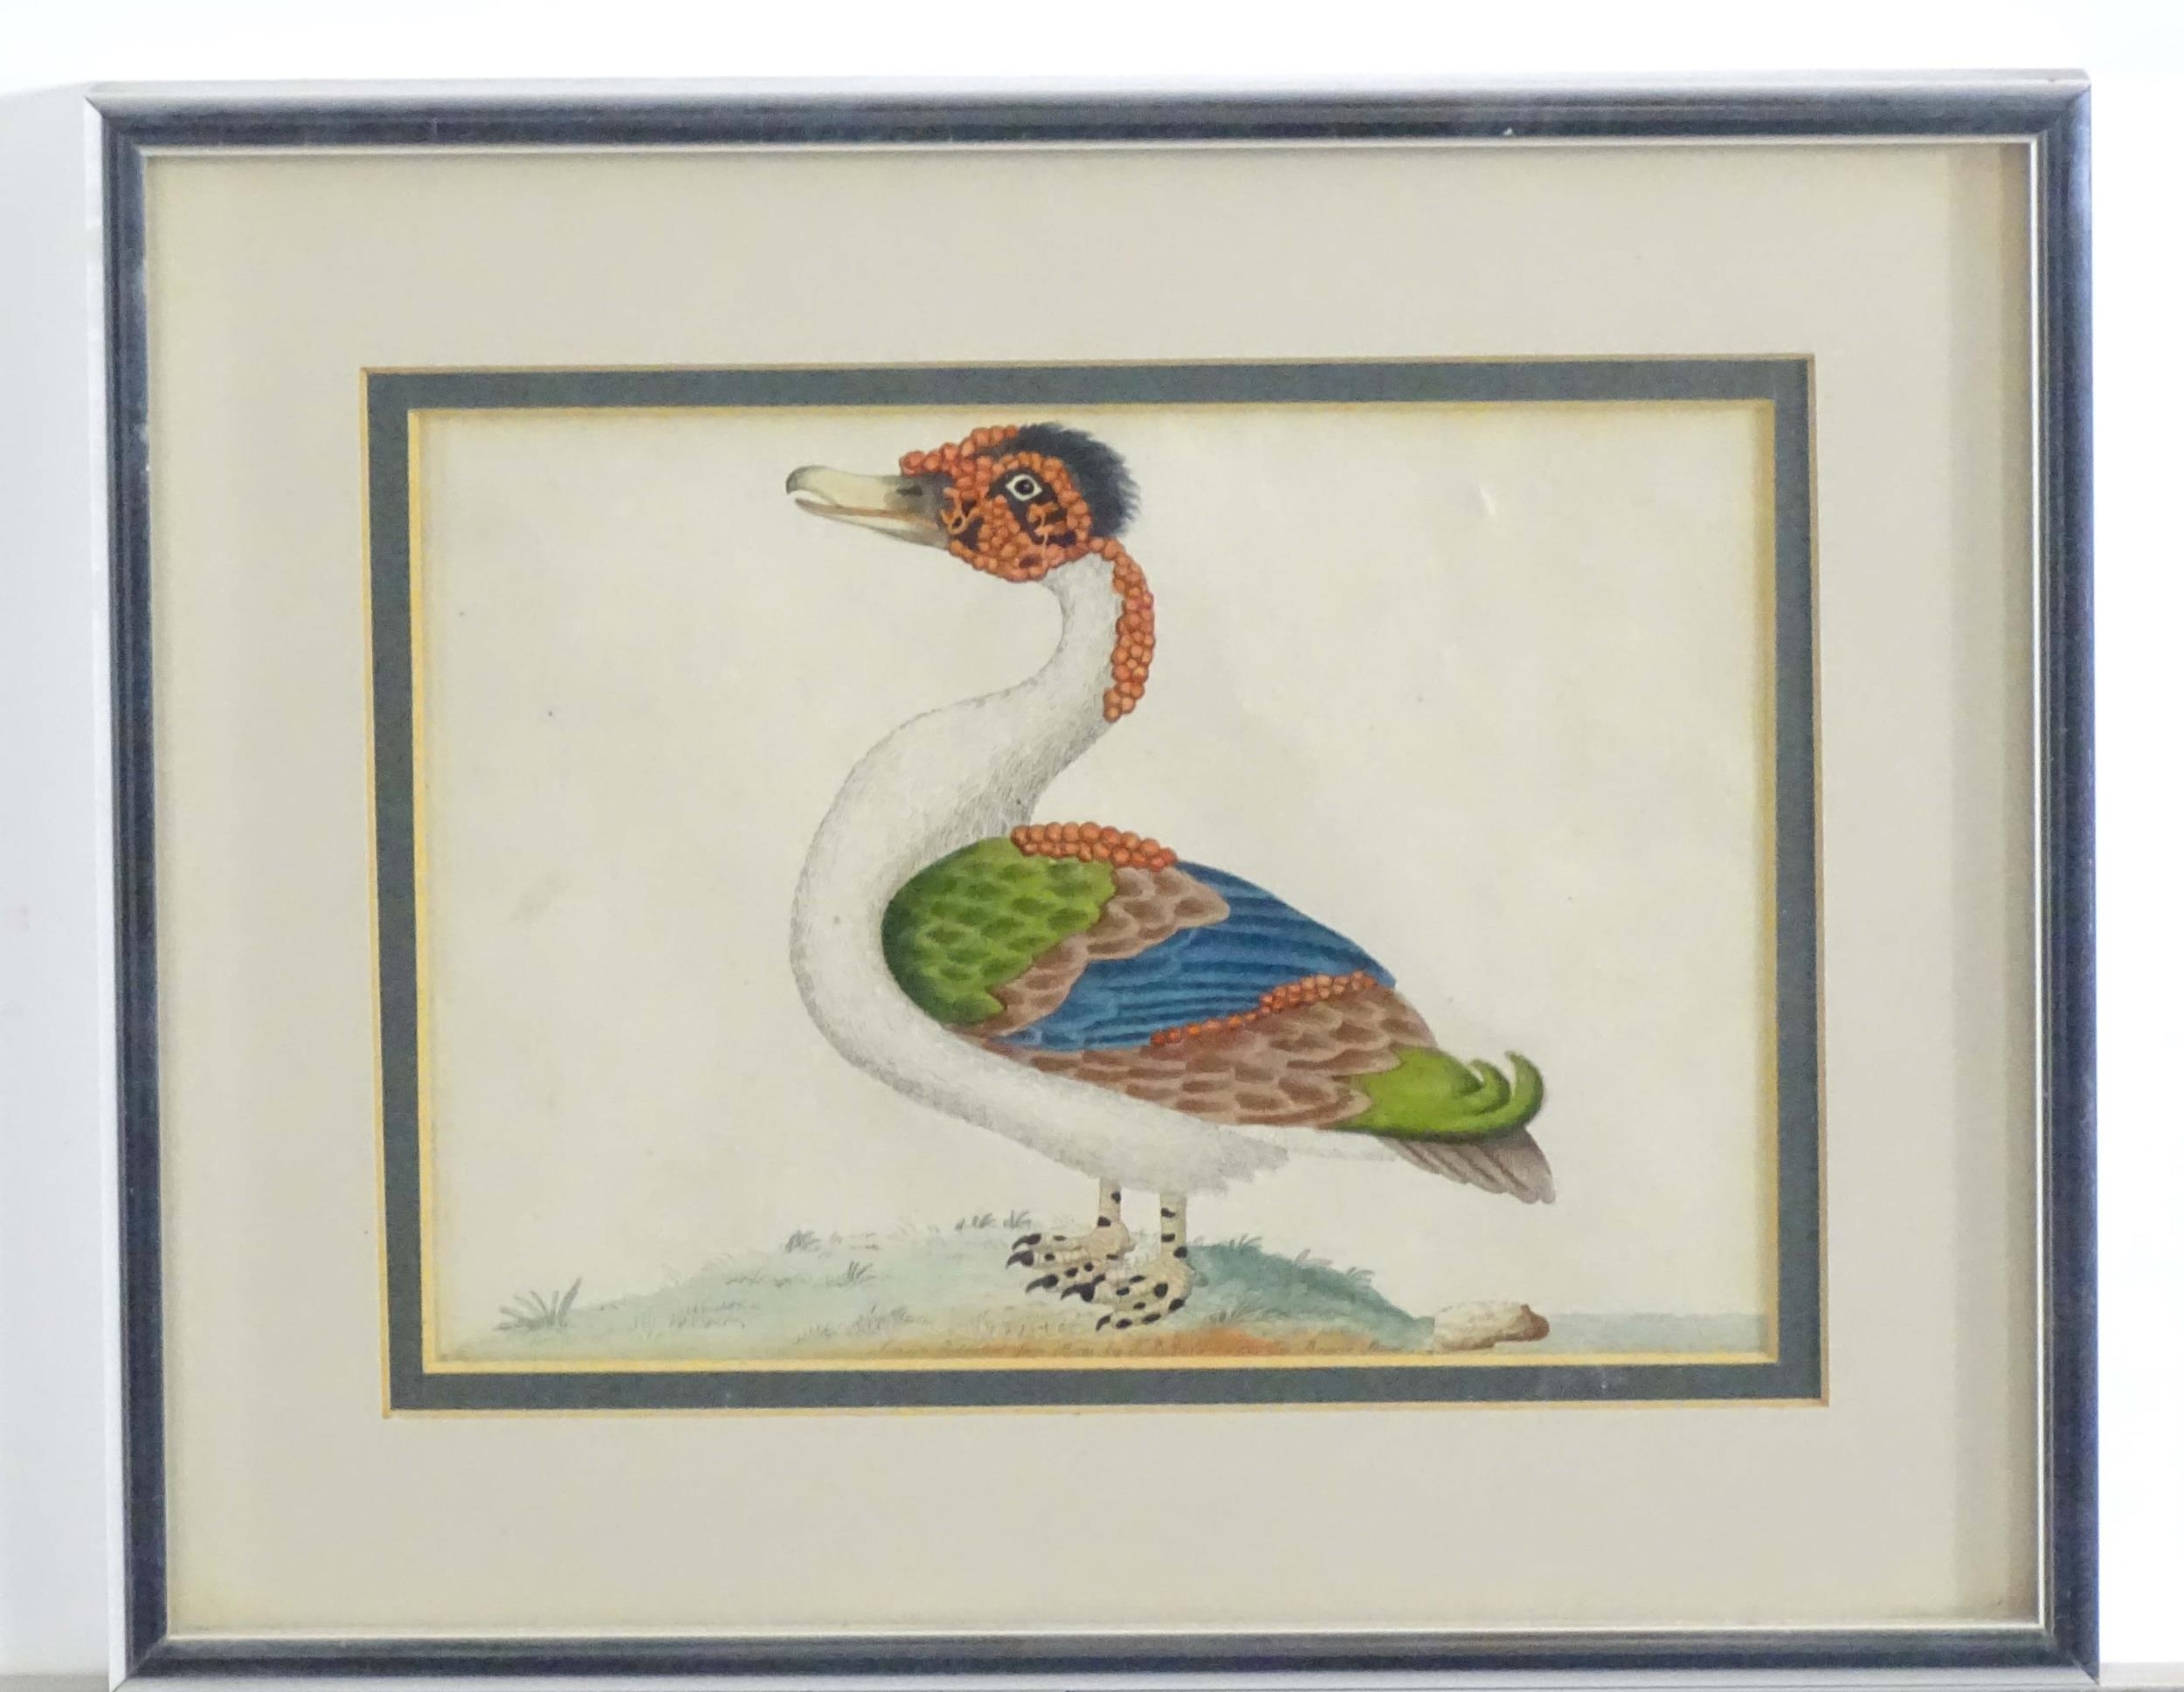 Late 18th / early 19th century, Hand coloured ornithological engravings, Merian duck, Ibis, and - Image 4 of 5